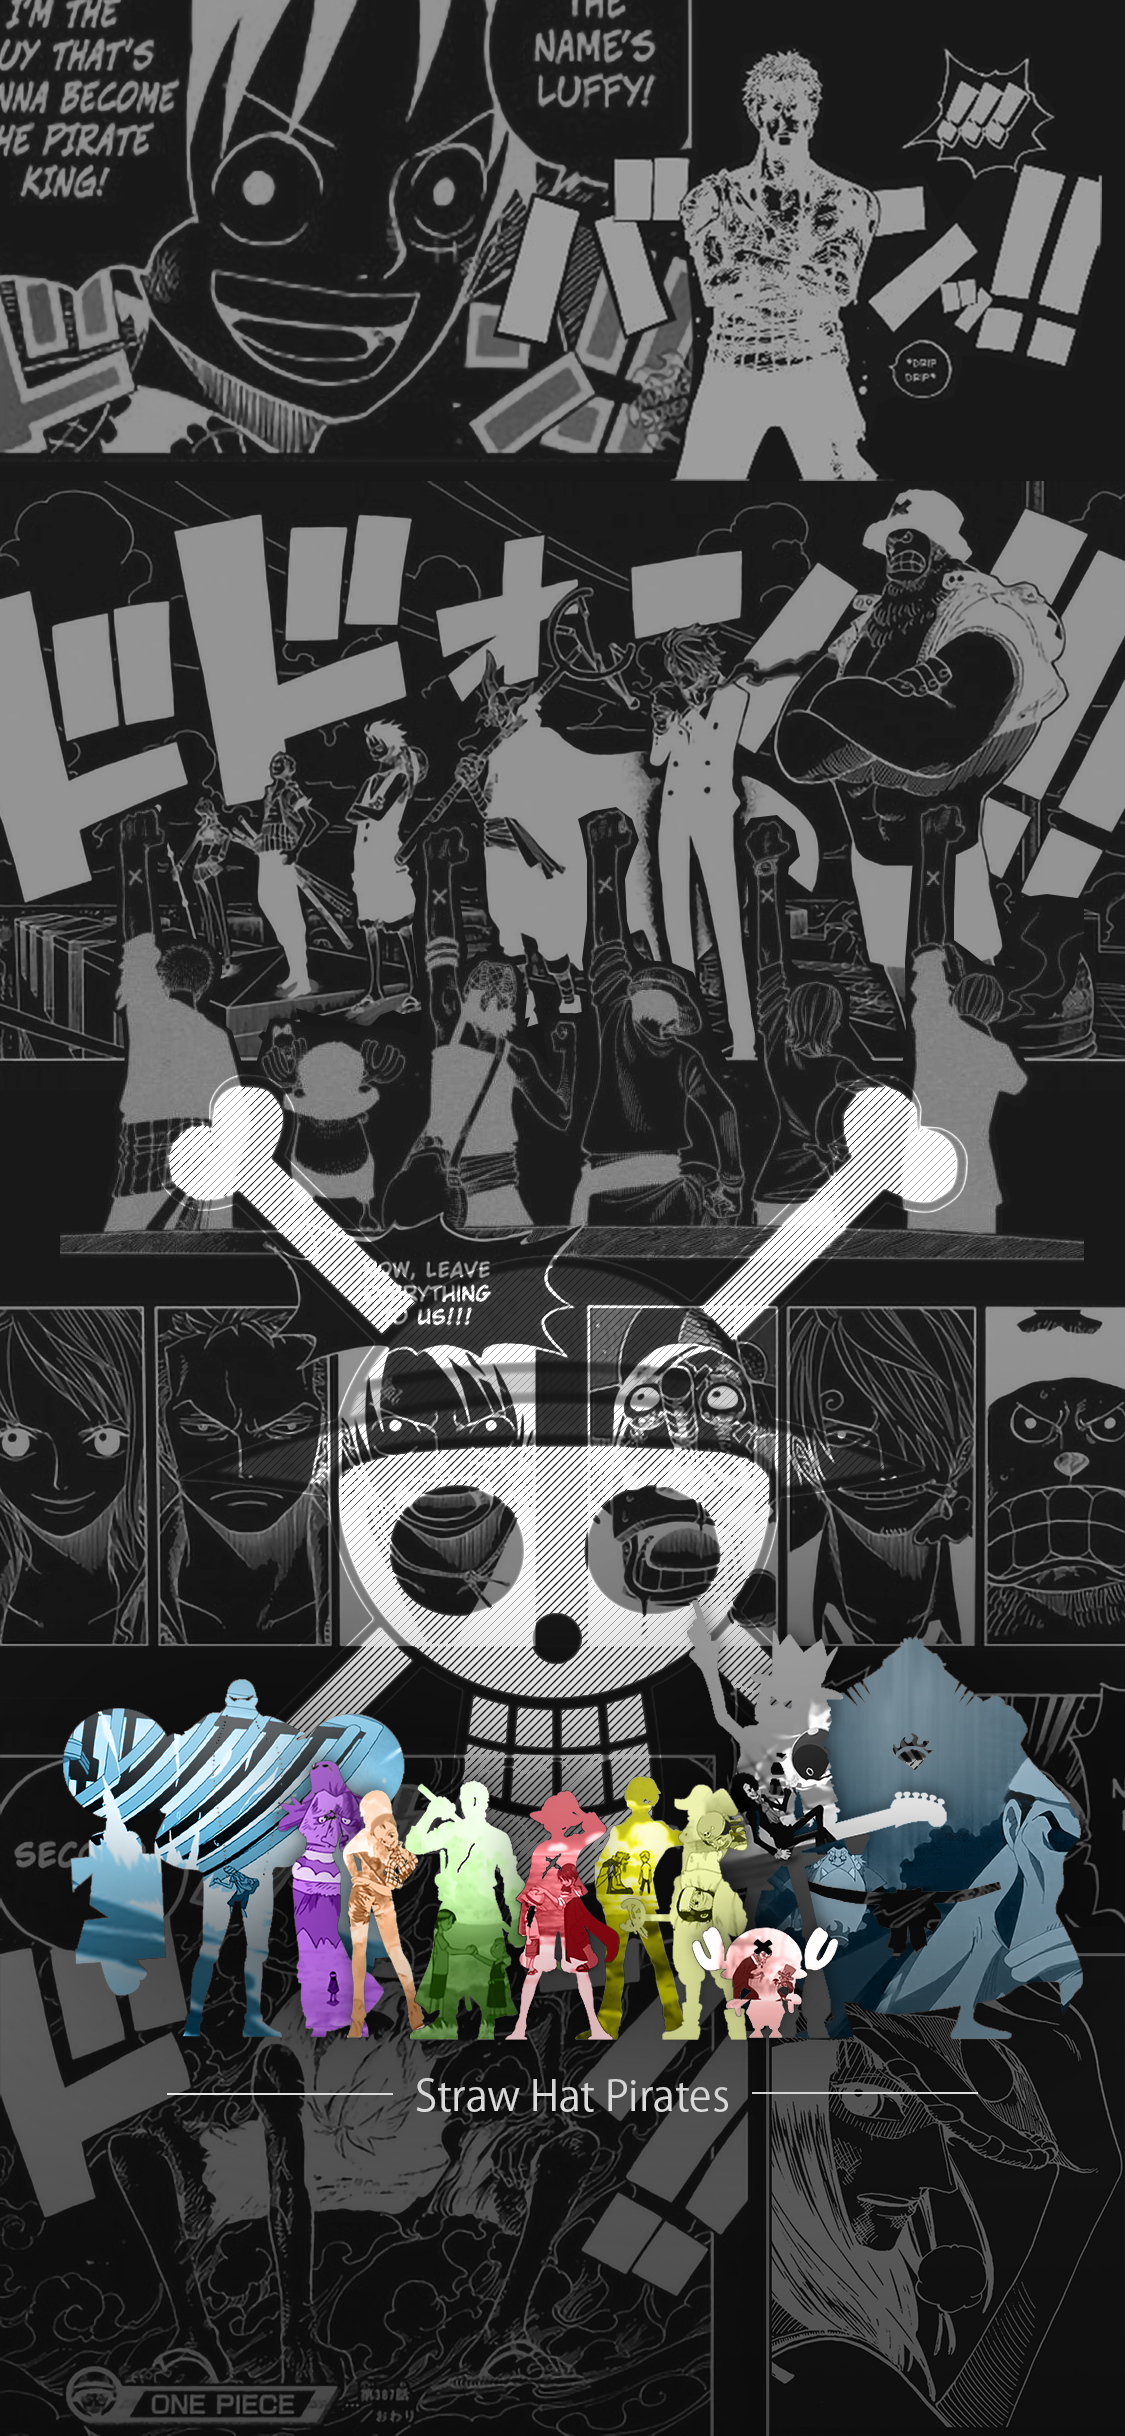 One Piece Iphone Wallpaper Eng Ver By Afifrafiqin On Deviantart